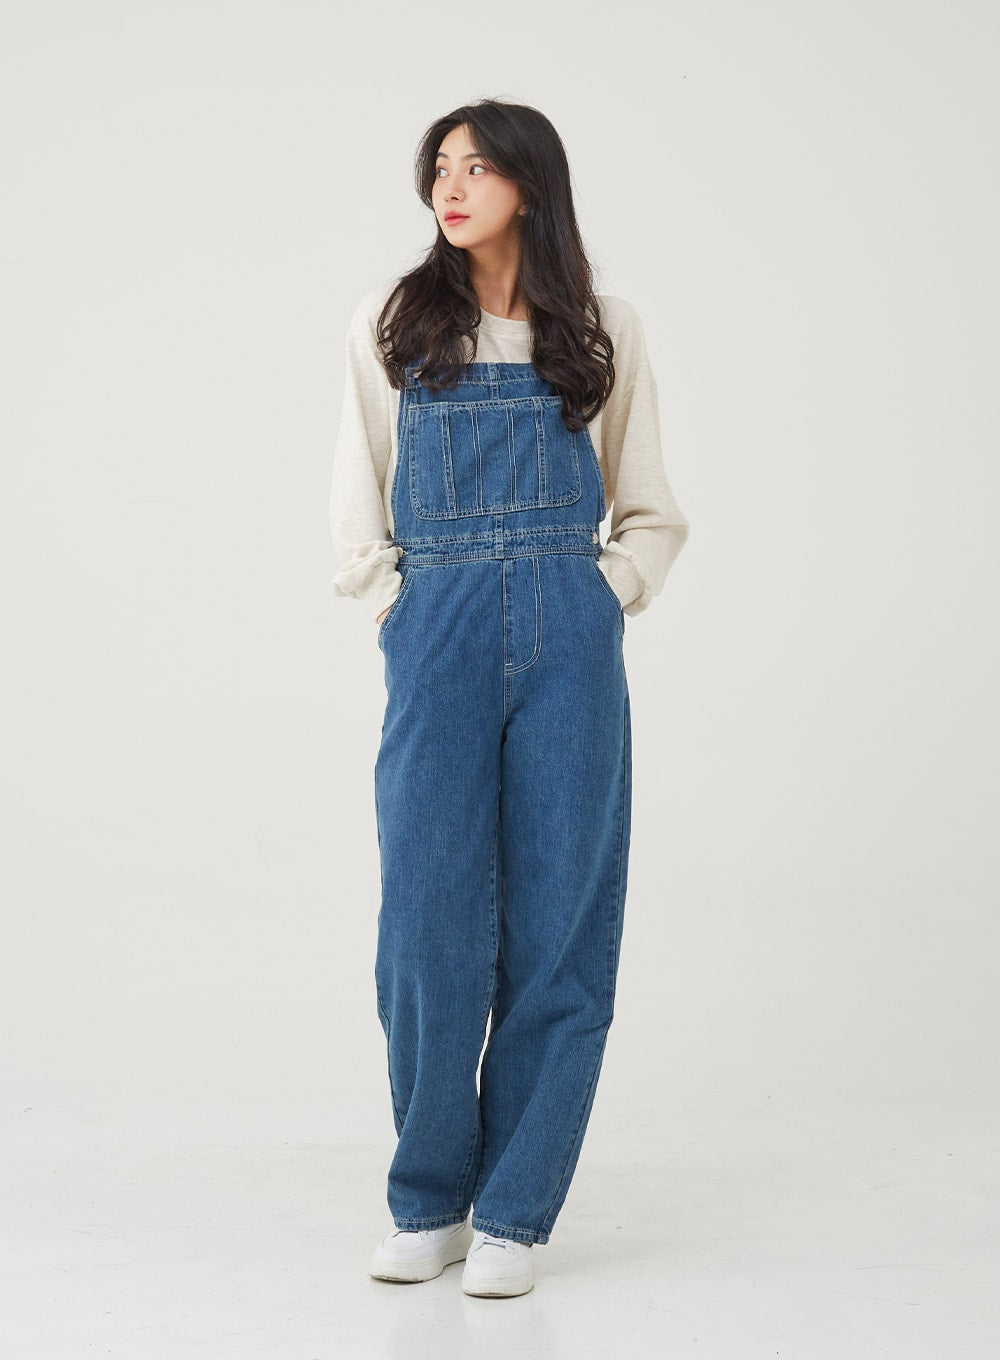 90s Denim Overalls Blue Jean Dungarees Vintage Baggy Overall Pants For  Women Denim Workwear Bib Overalls 90s Clothing Size Medium From  Fashionfirst, $17.89 | DHgate.Com